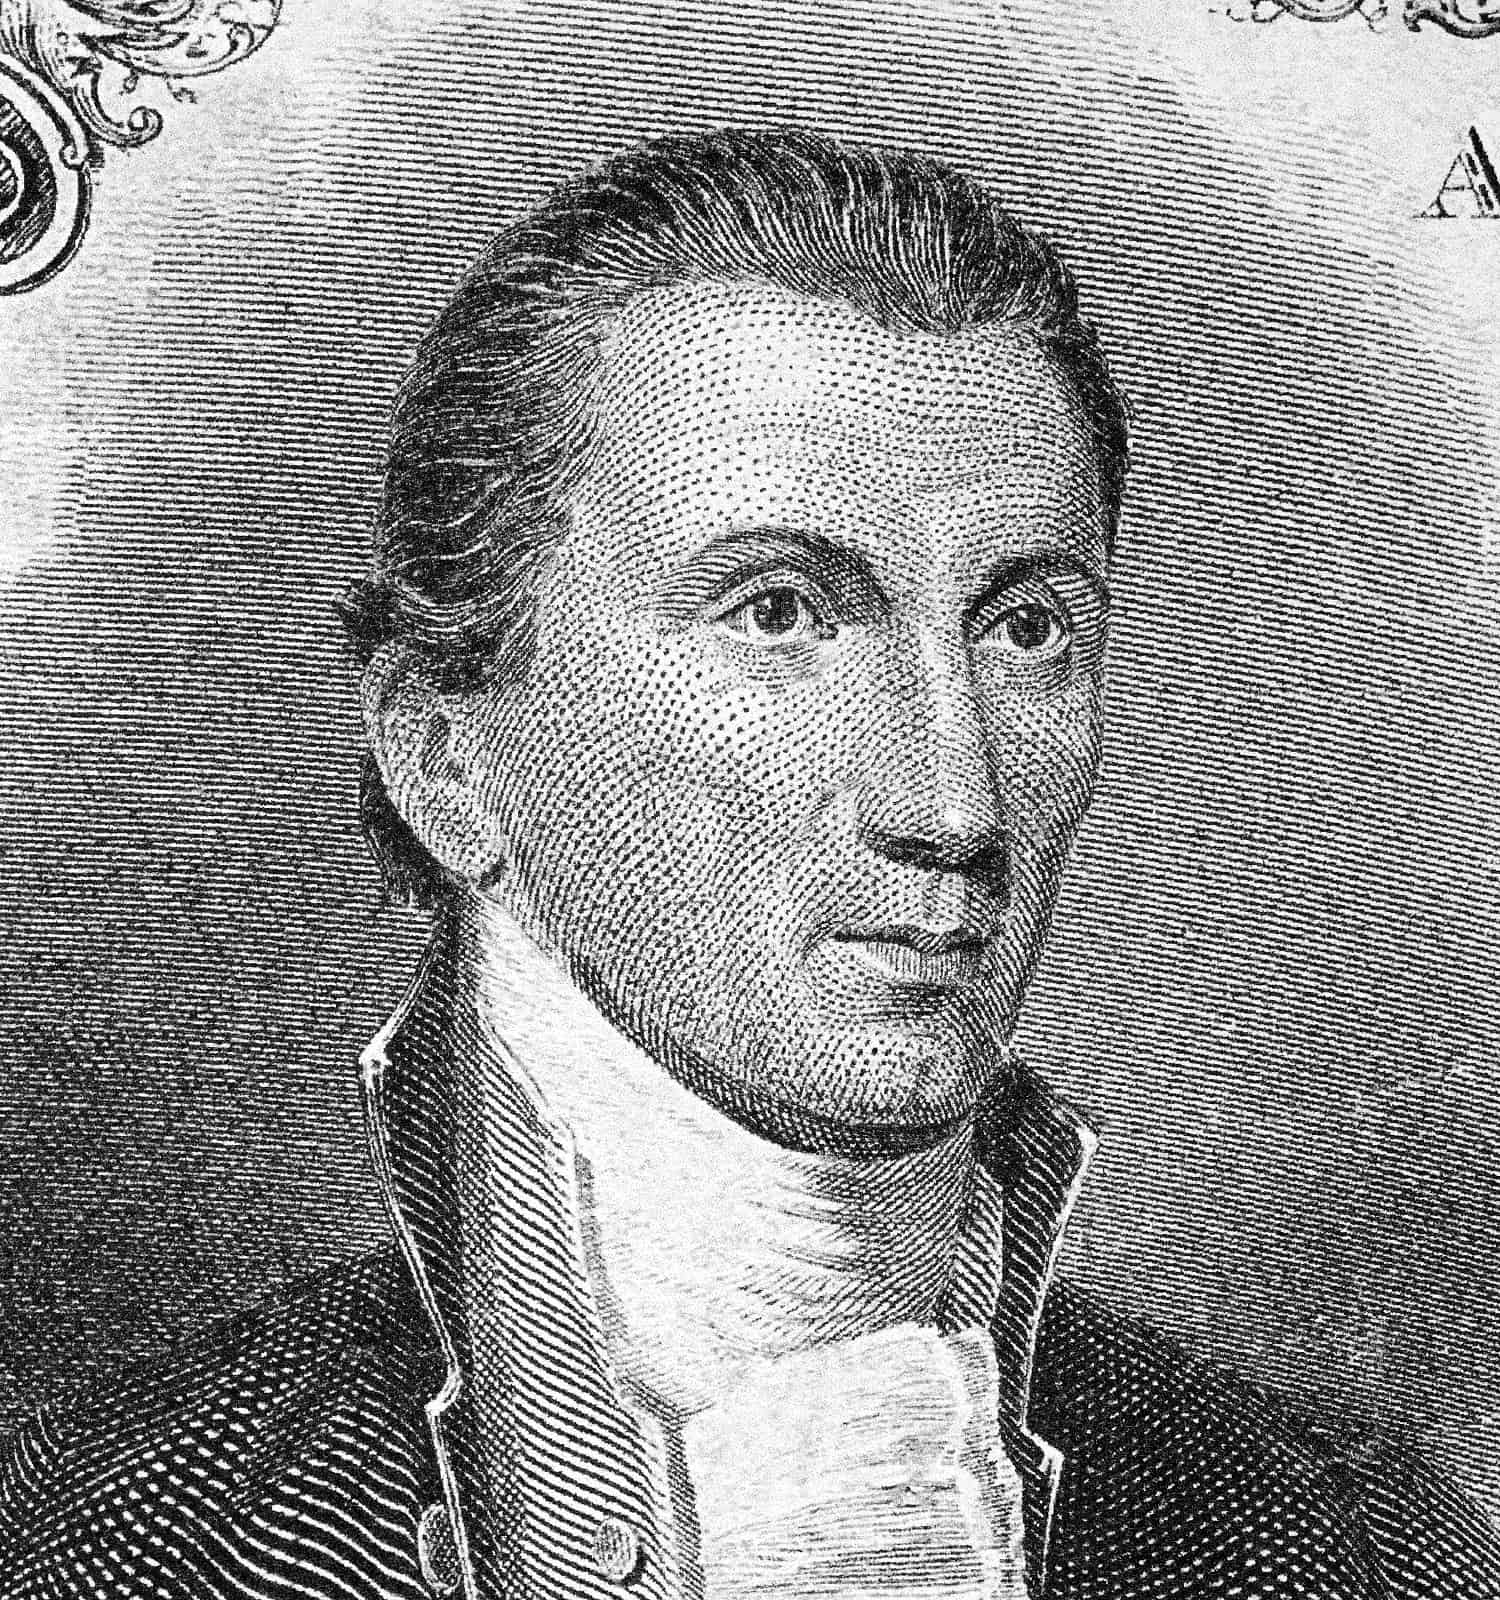 James Monroe a portrait from old American money